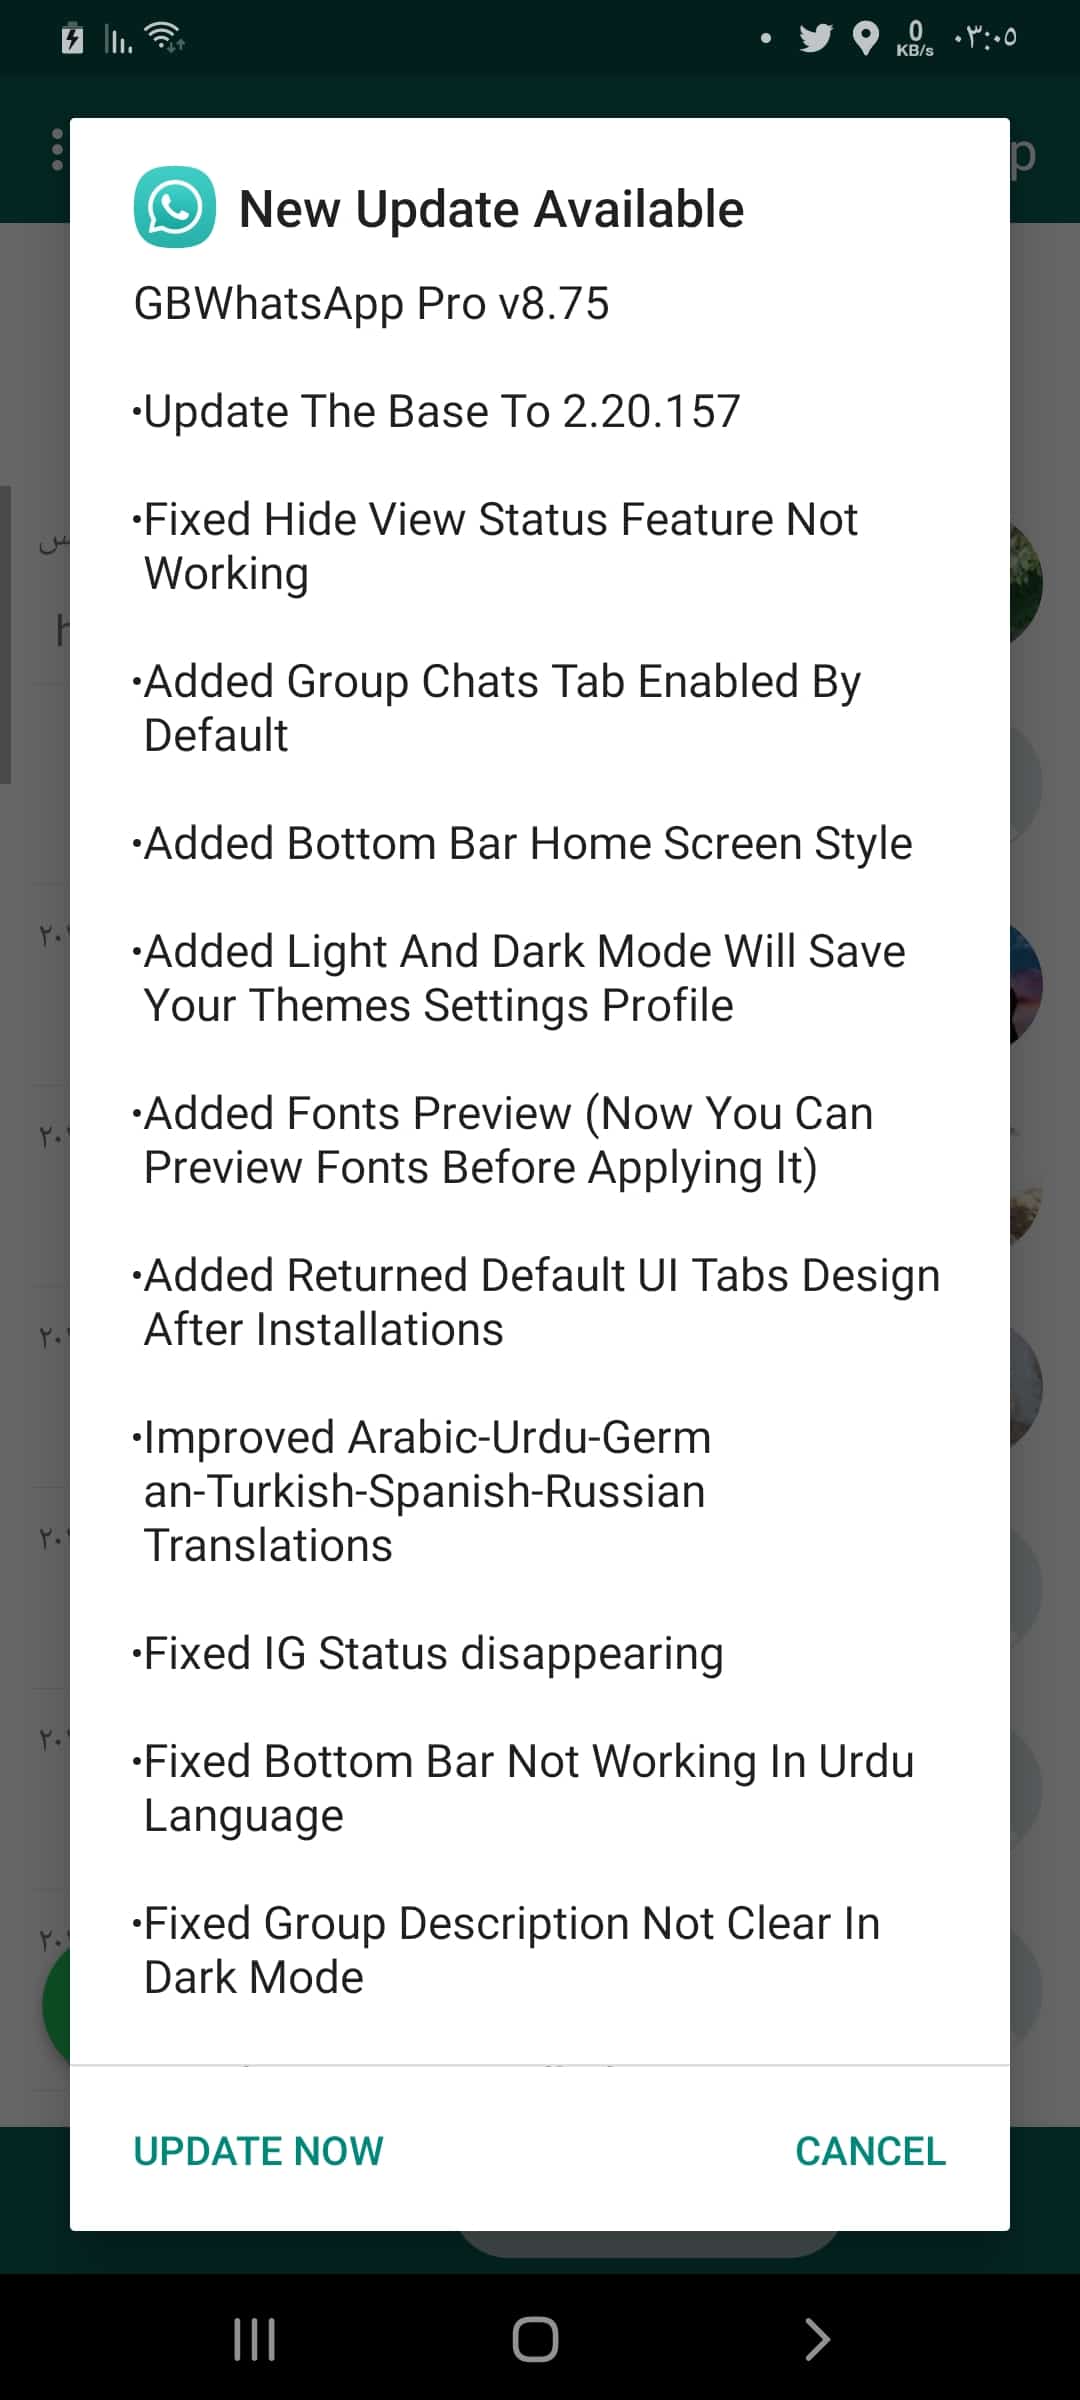 V12.00 download latest android gbwhatsapp pro version for GB Version